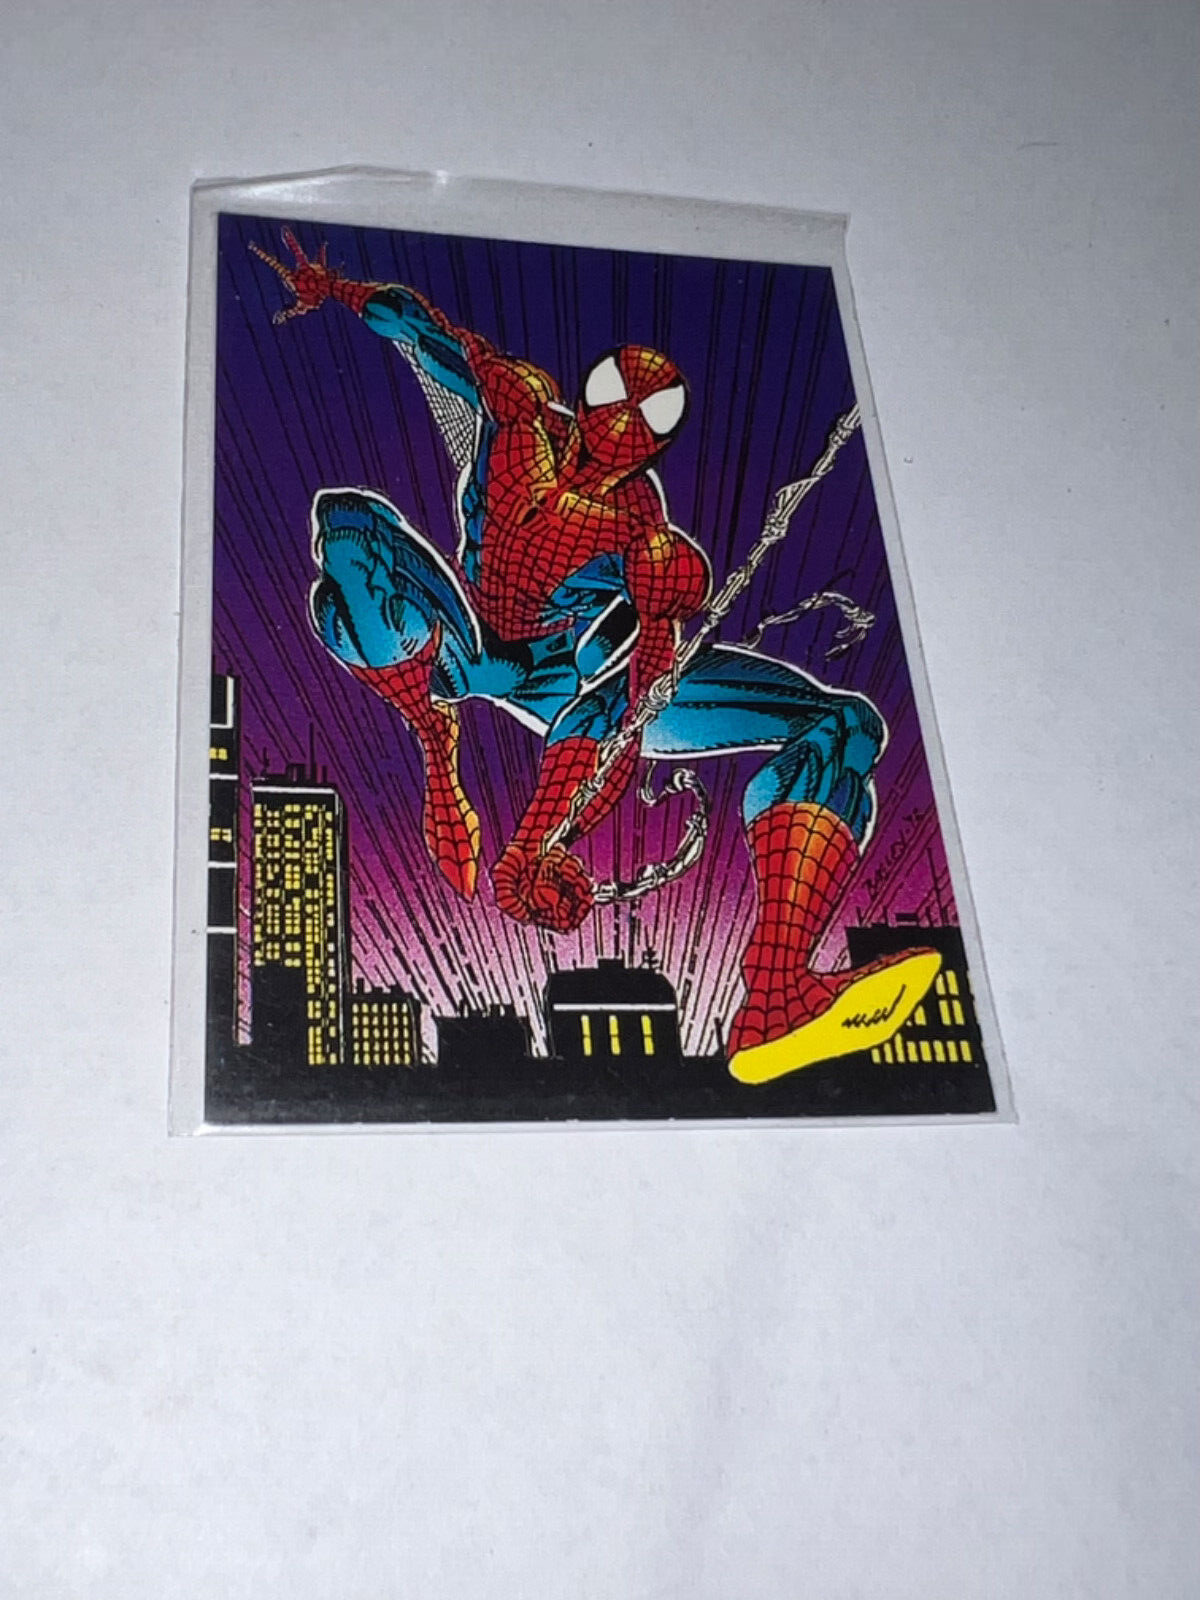 1992 MARVEL SPIDER-MAN 30TH ANNIVERSARY PROMO PROMOTIONAL CARD NM-MT C#A#49